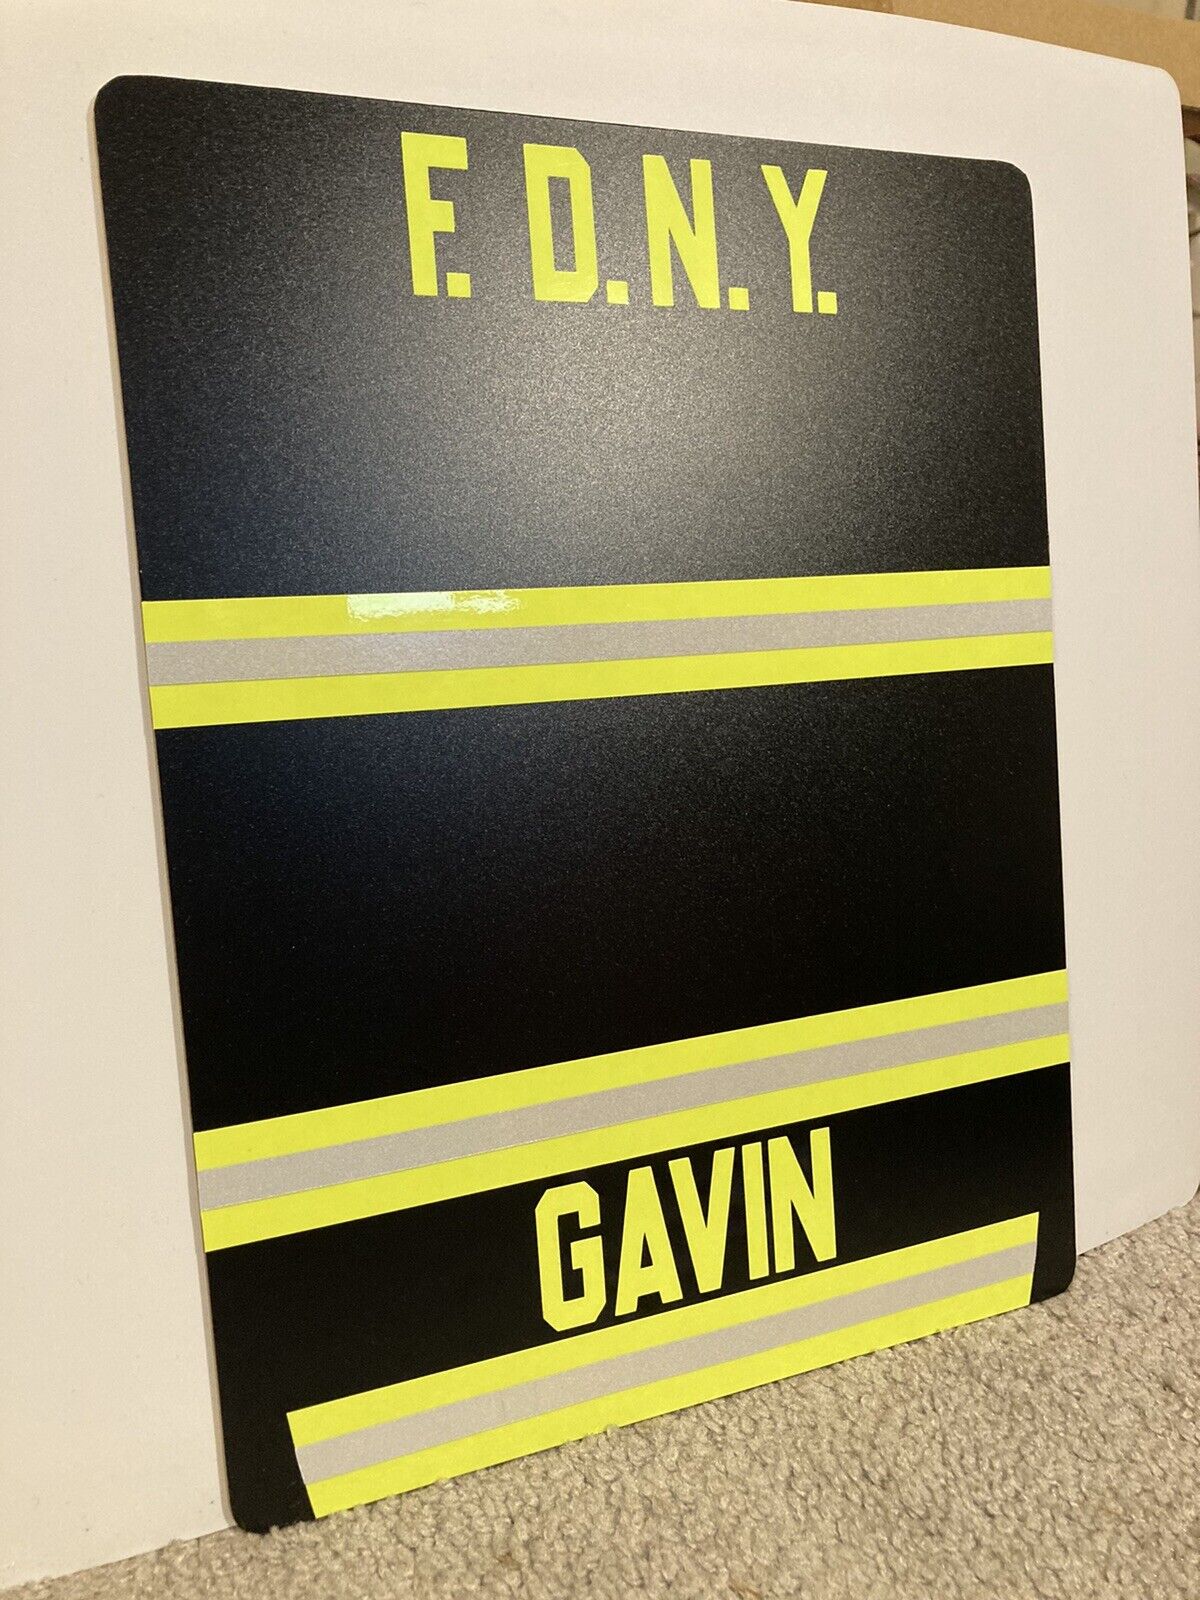 FDNY REFLECTIVE Vinyl Turnout Sign  *SEE DESCRIPTION* Rescue Me Tommy Gavin